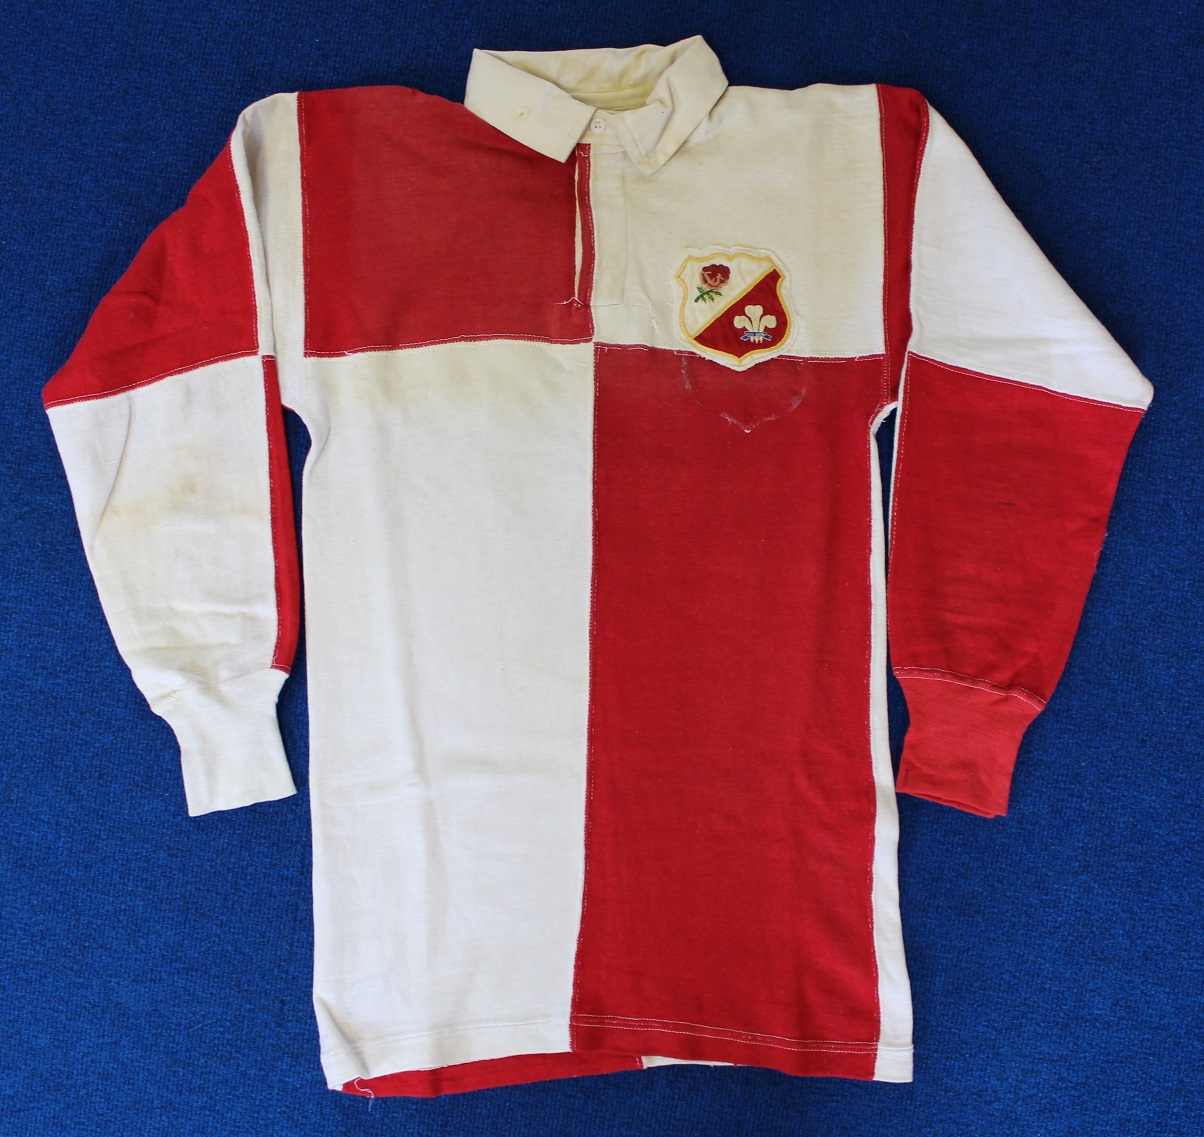 Jersey worn by England-Wales Prop Ray Prosser